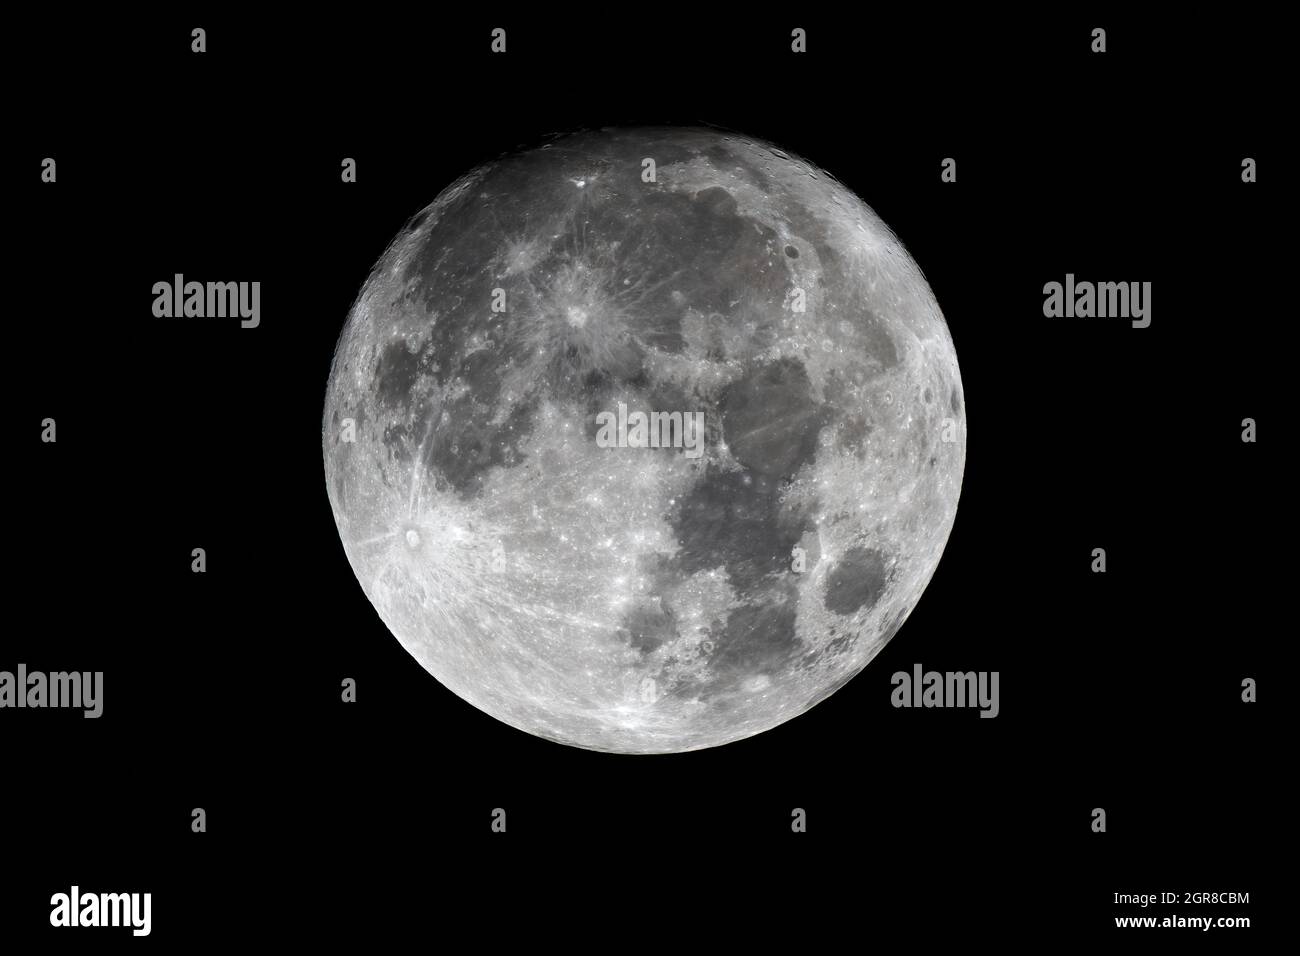 Full Moon Against a Black Background Stock Photo